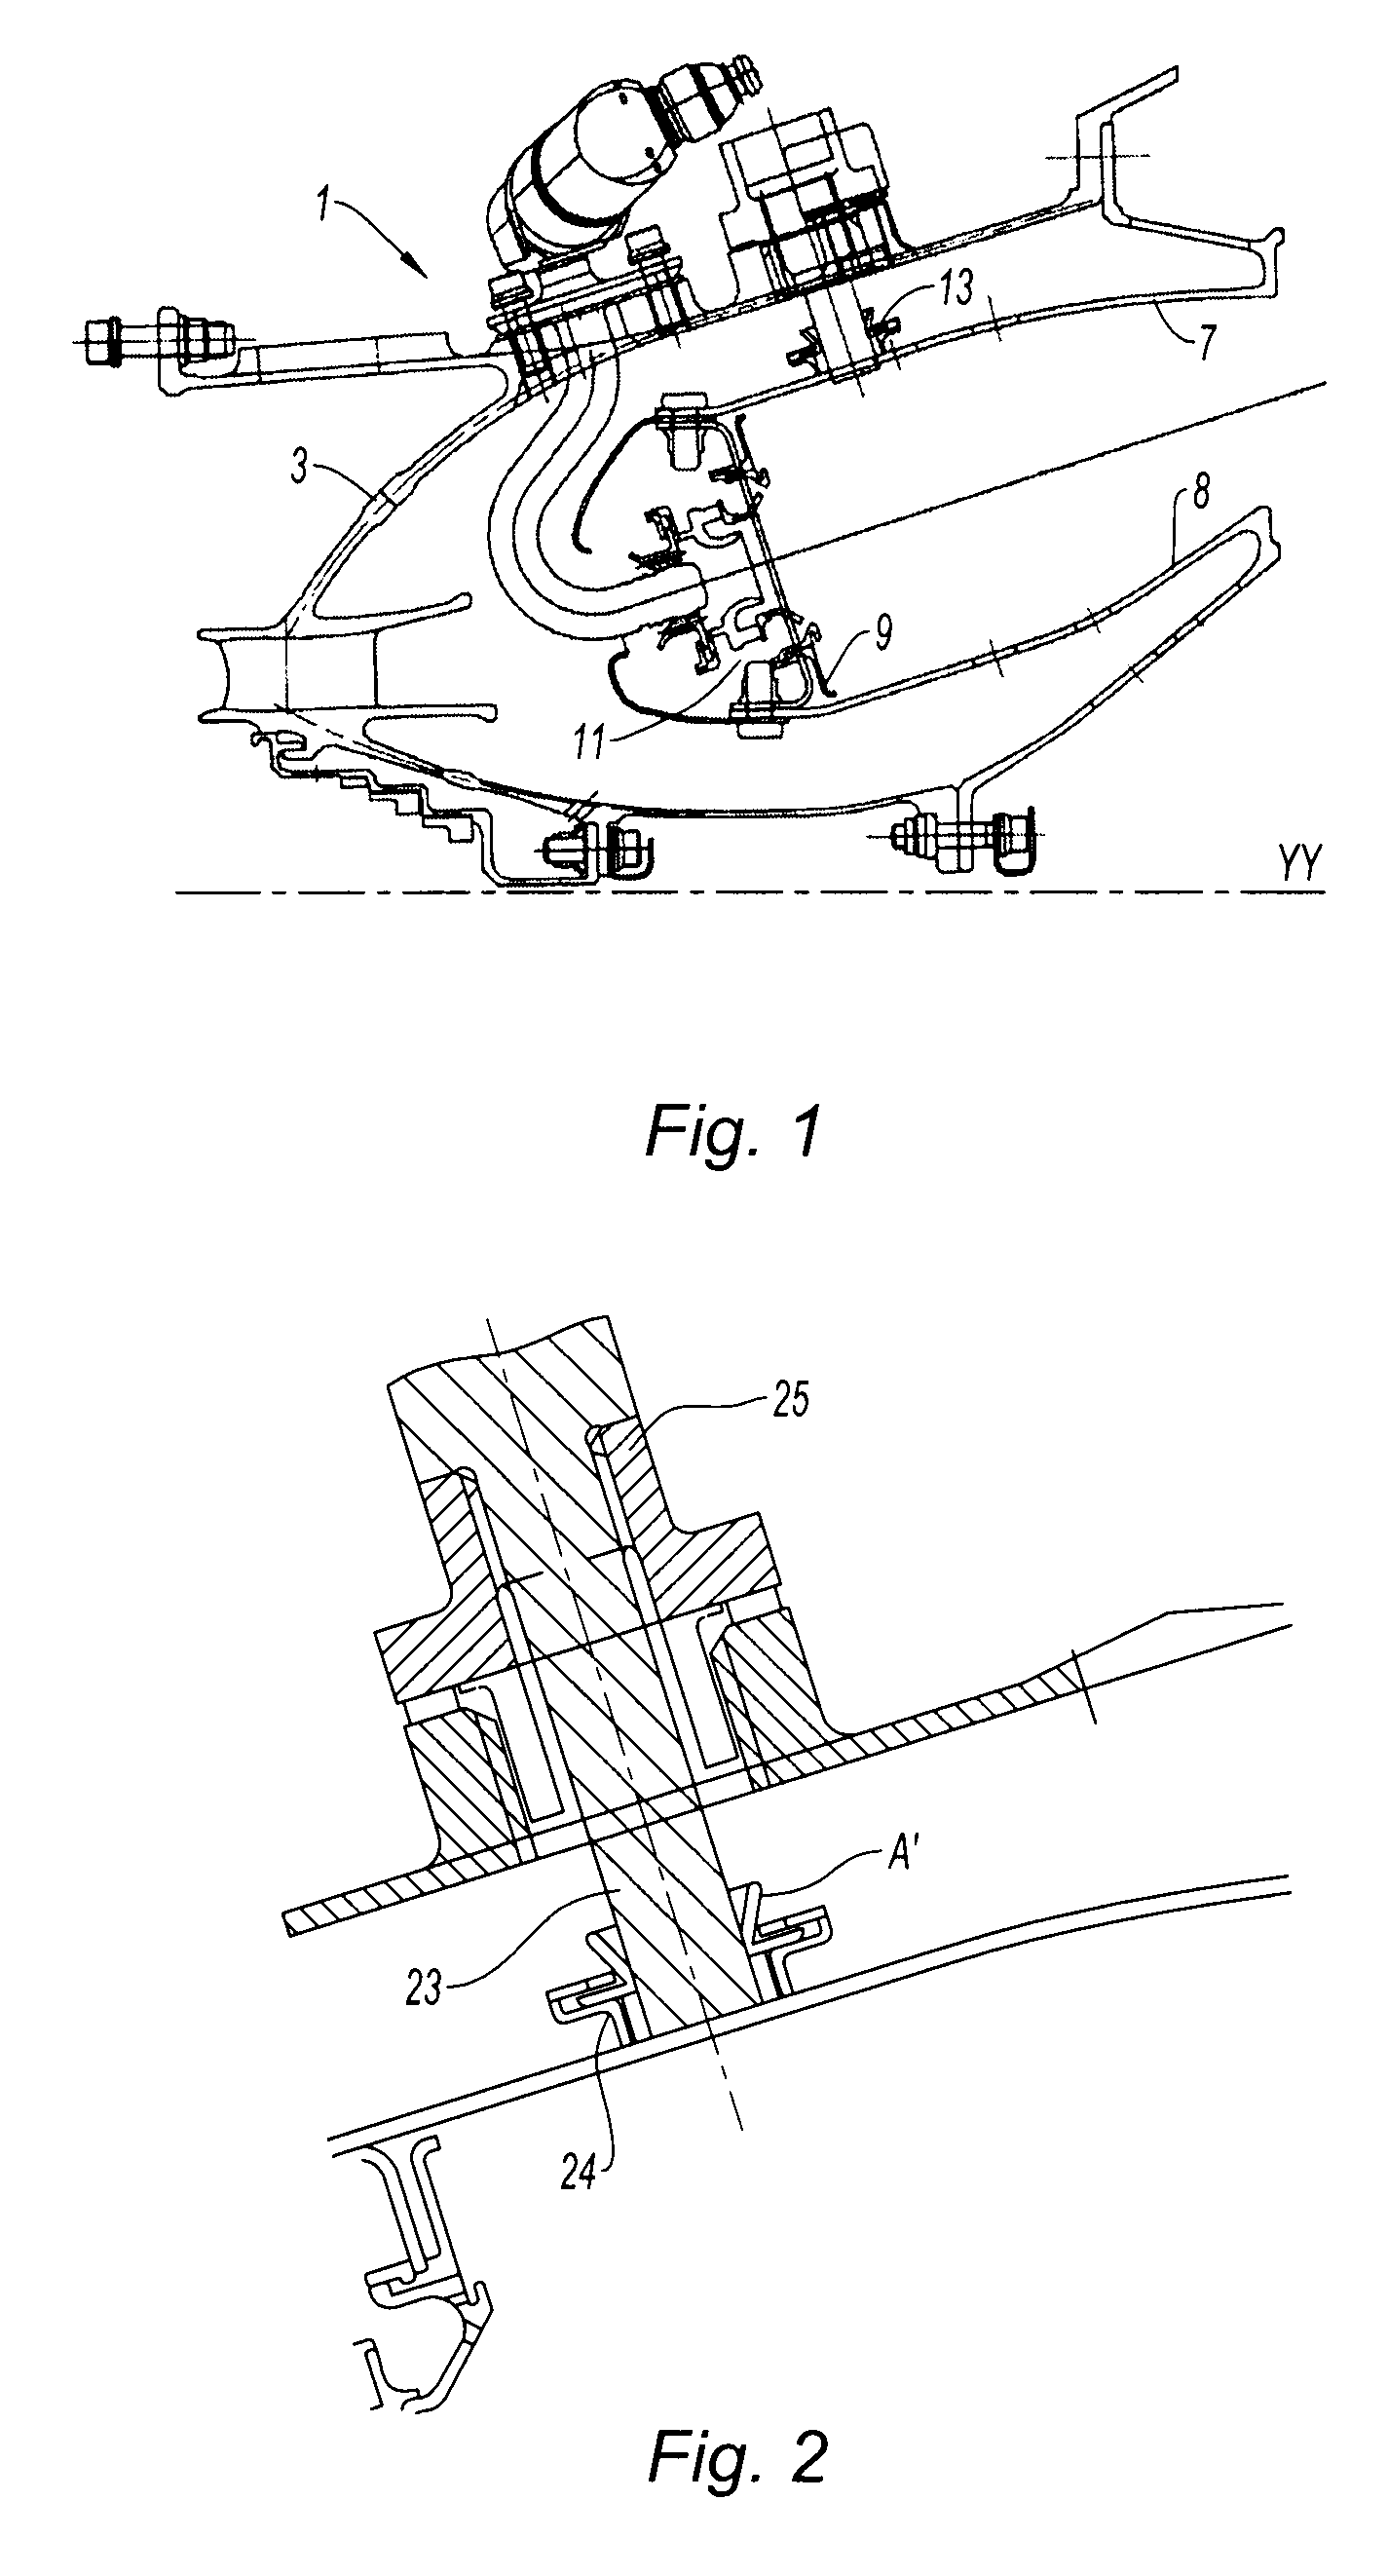 Device for mounting an igniter plug in a combustion chamber of a gas turbine engine